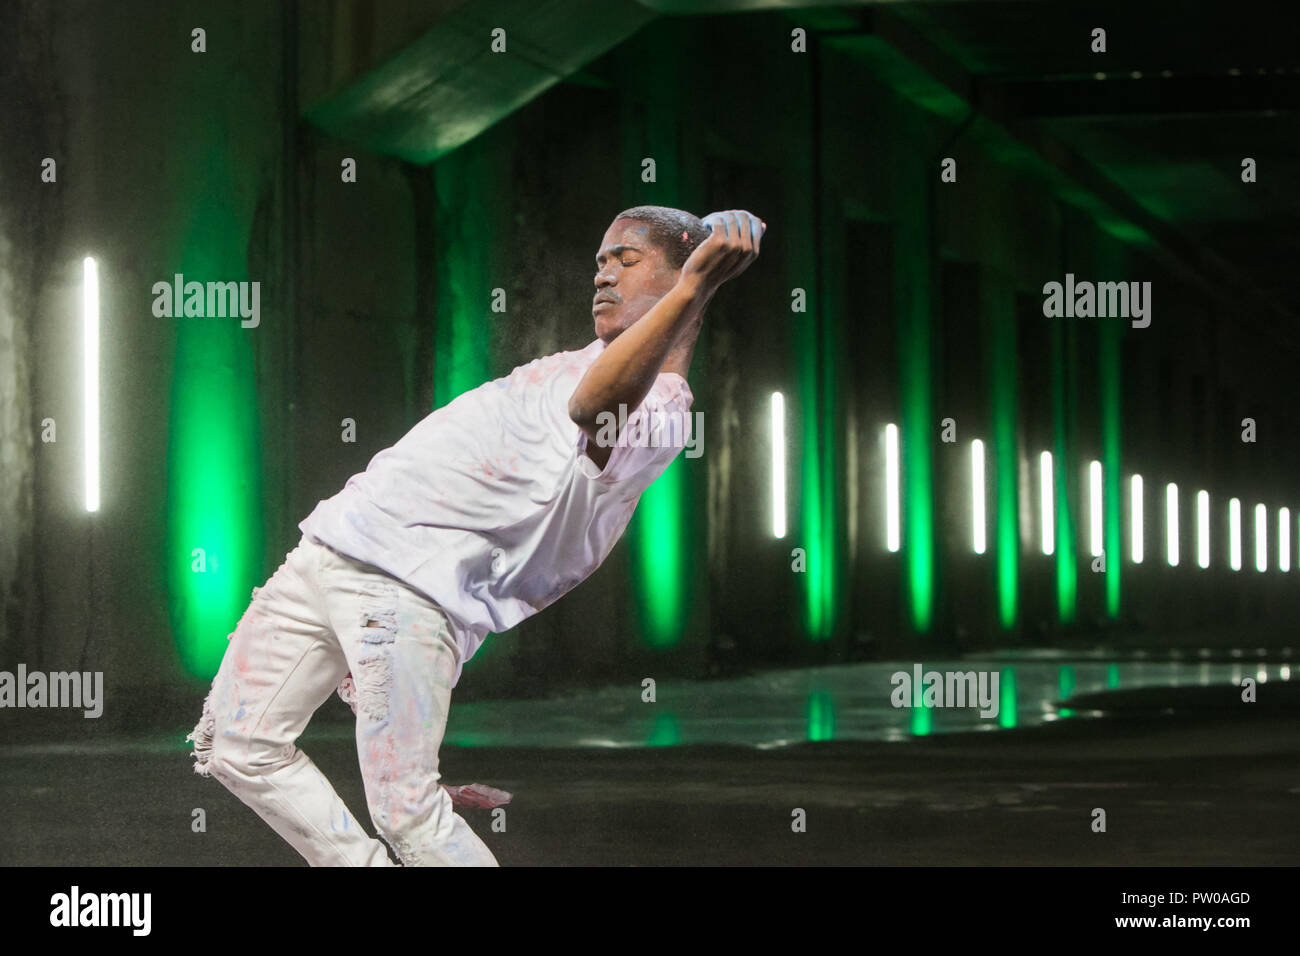 Man dancing with green background. Stock Photo